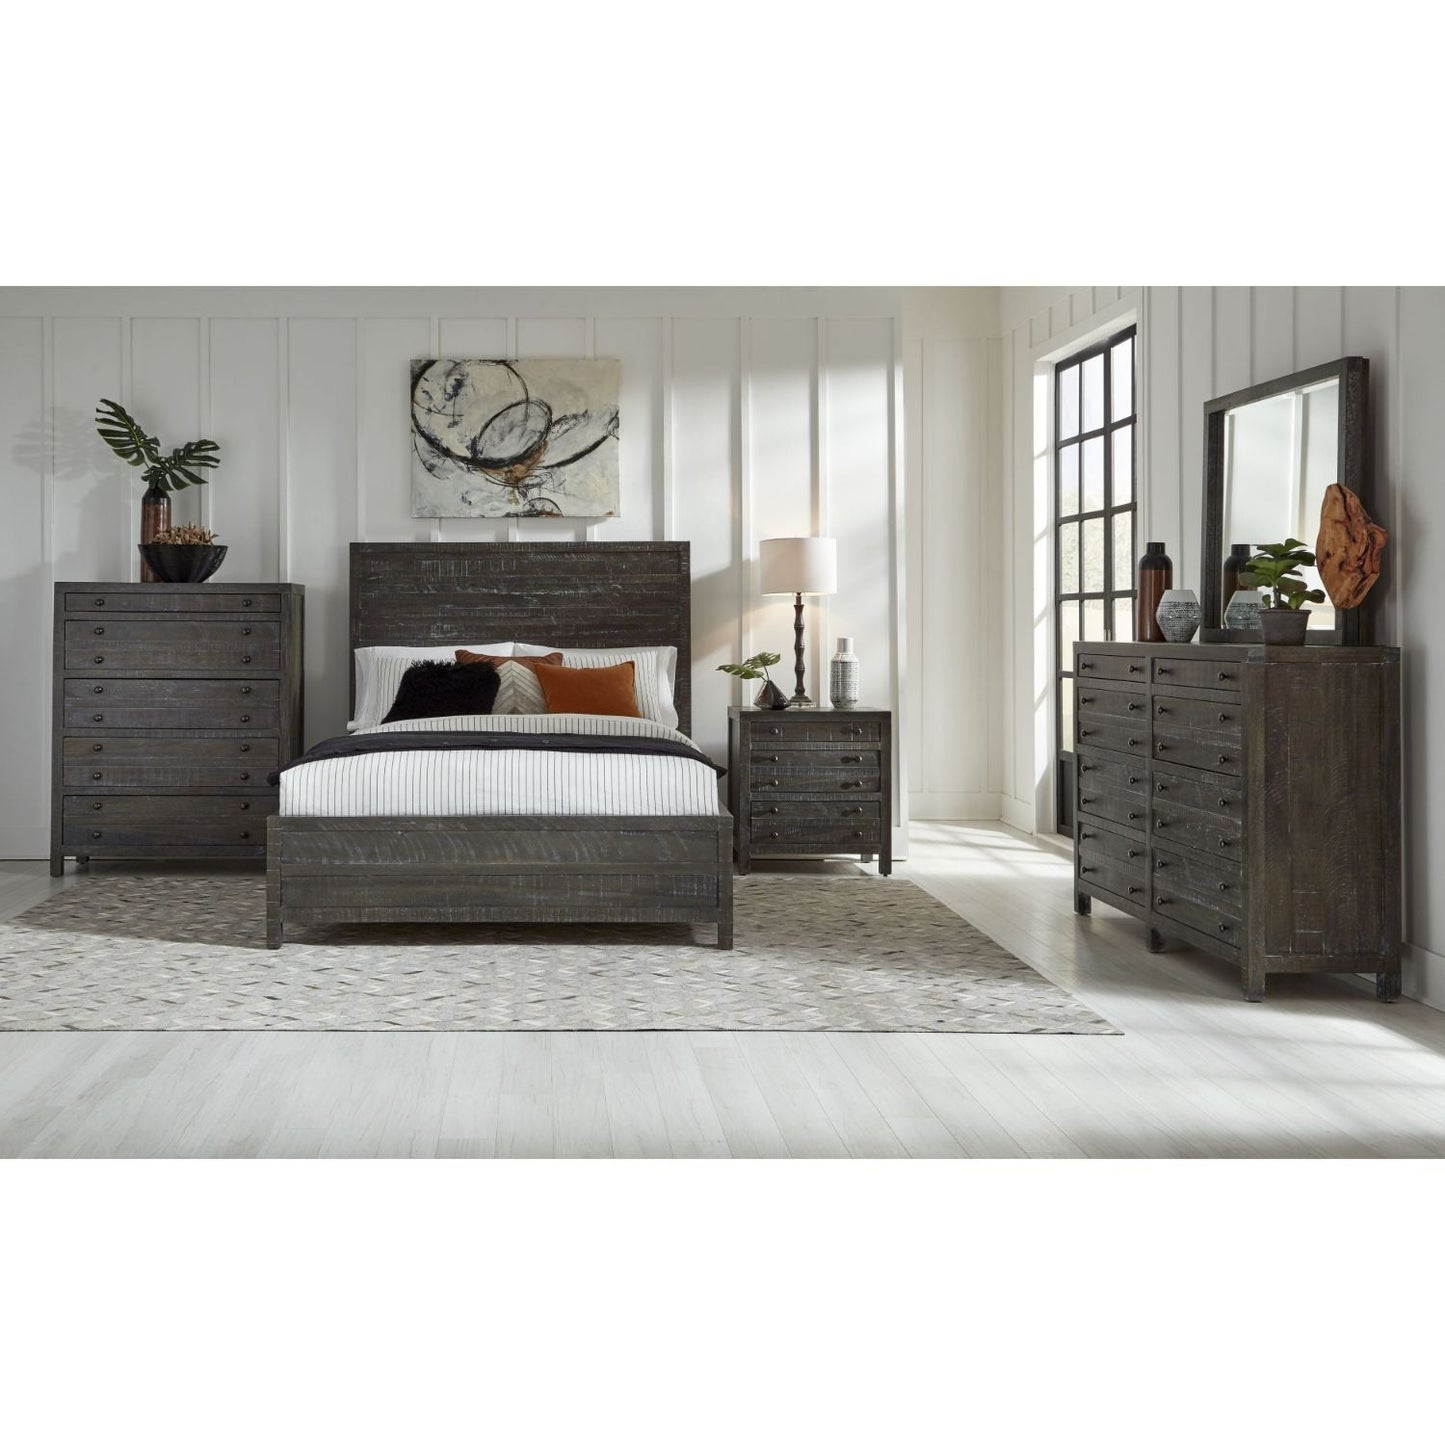 Modus Townsend Solid Wood Five Drawer Chest in Gunmetal